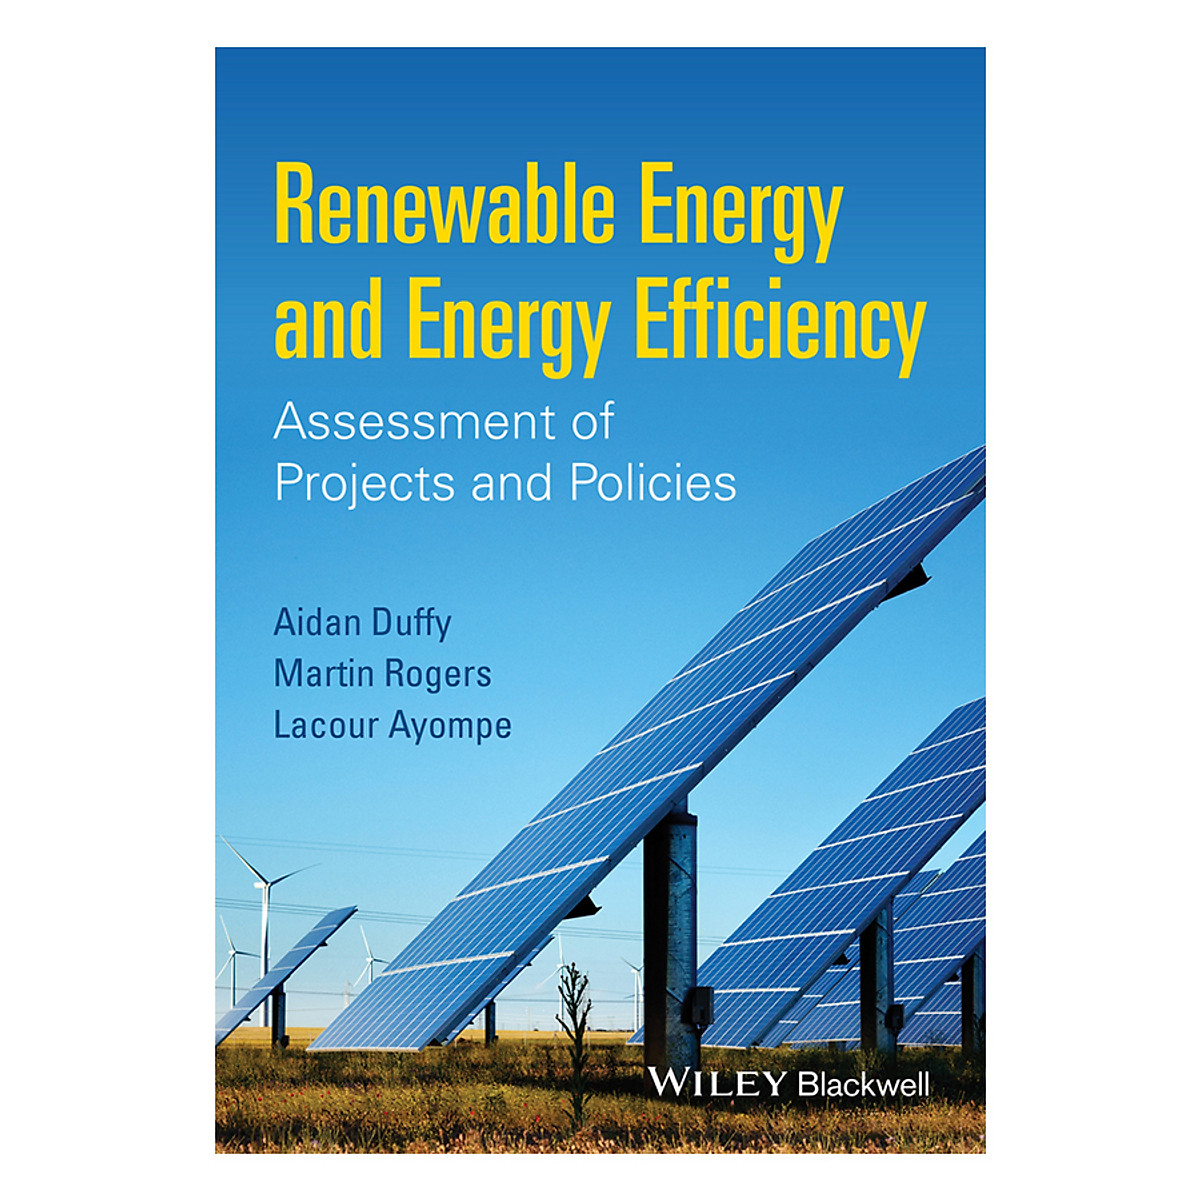 Renewable Energy And Energy Efficiency - Assessment Of Projects And Policies